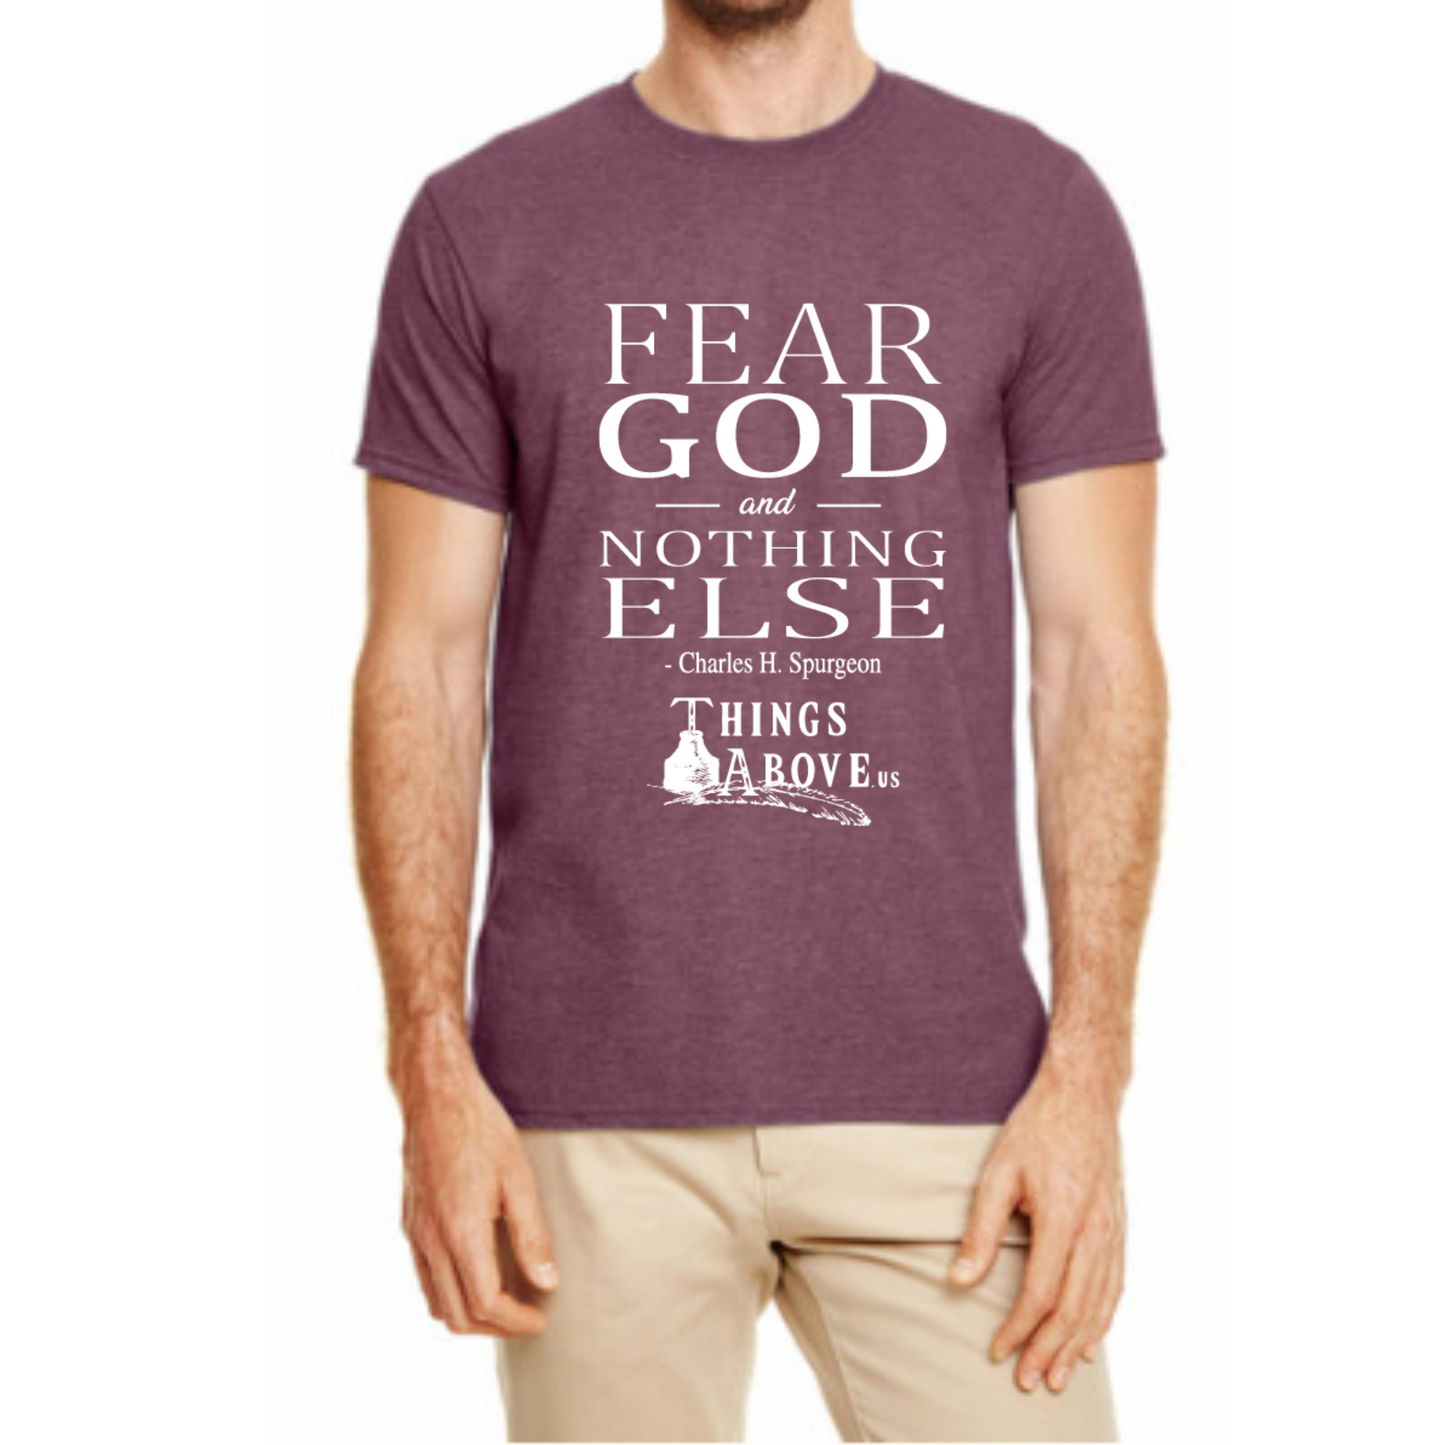 Fear God and Nothing Else Shirt - Things Above Us